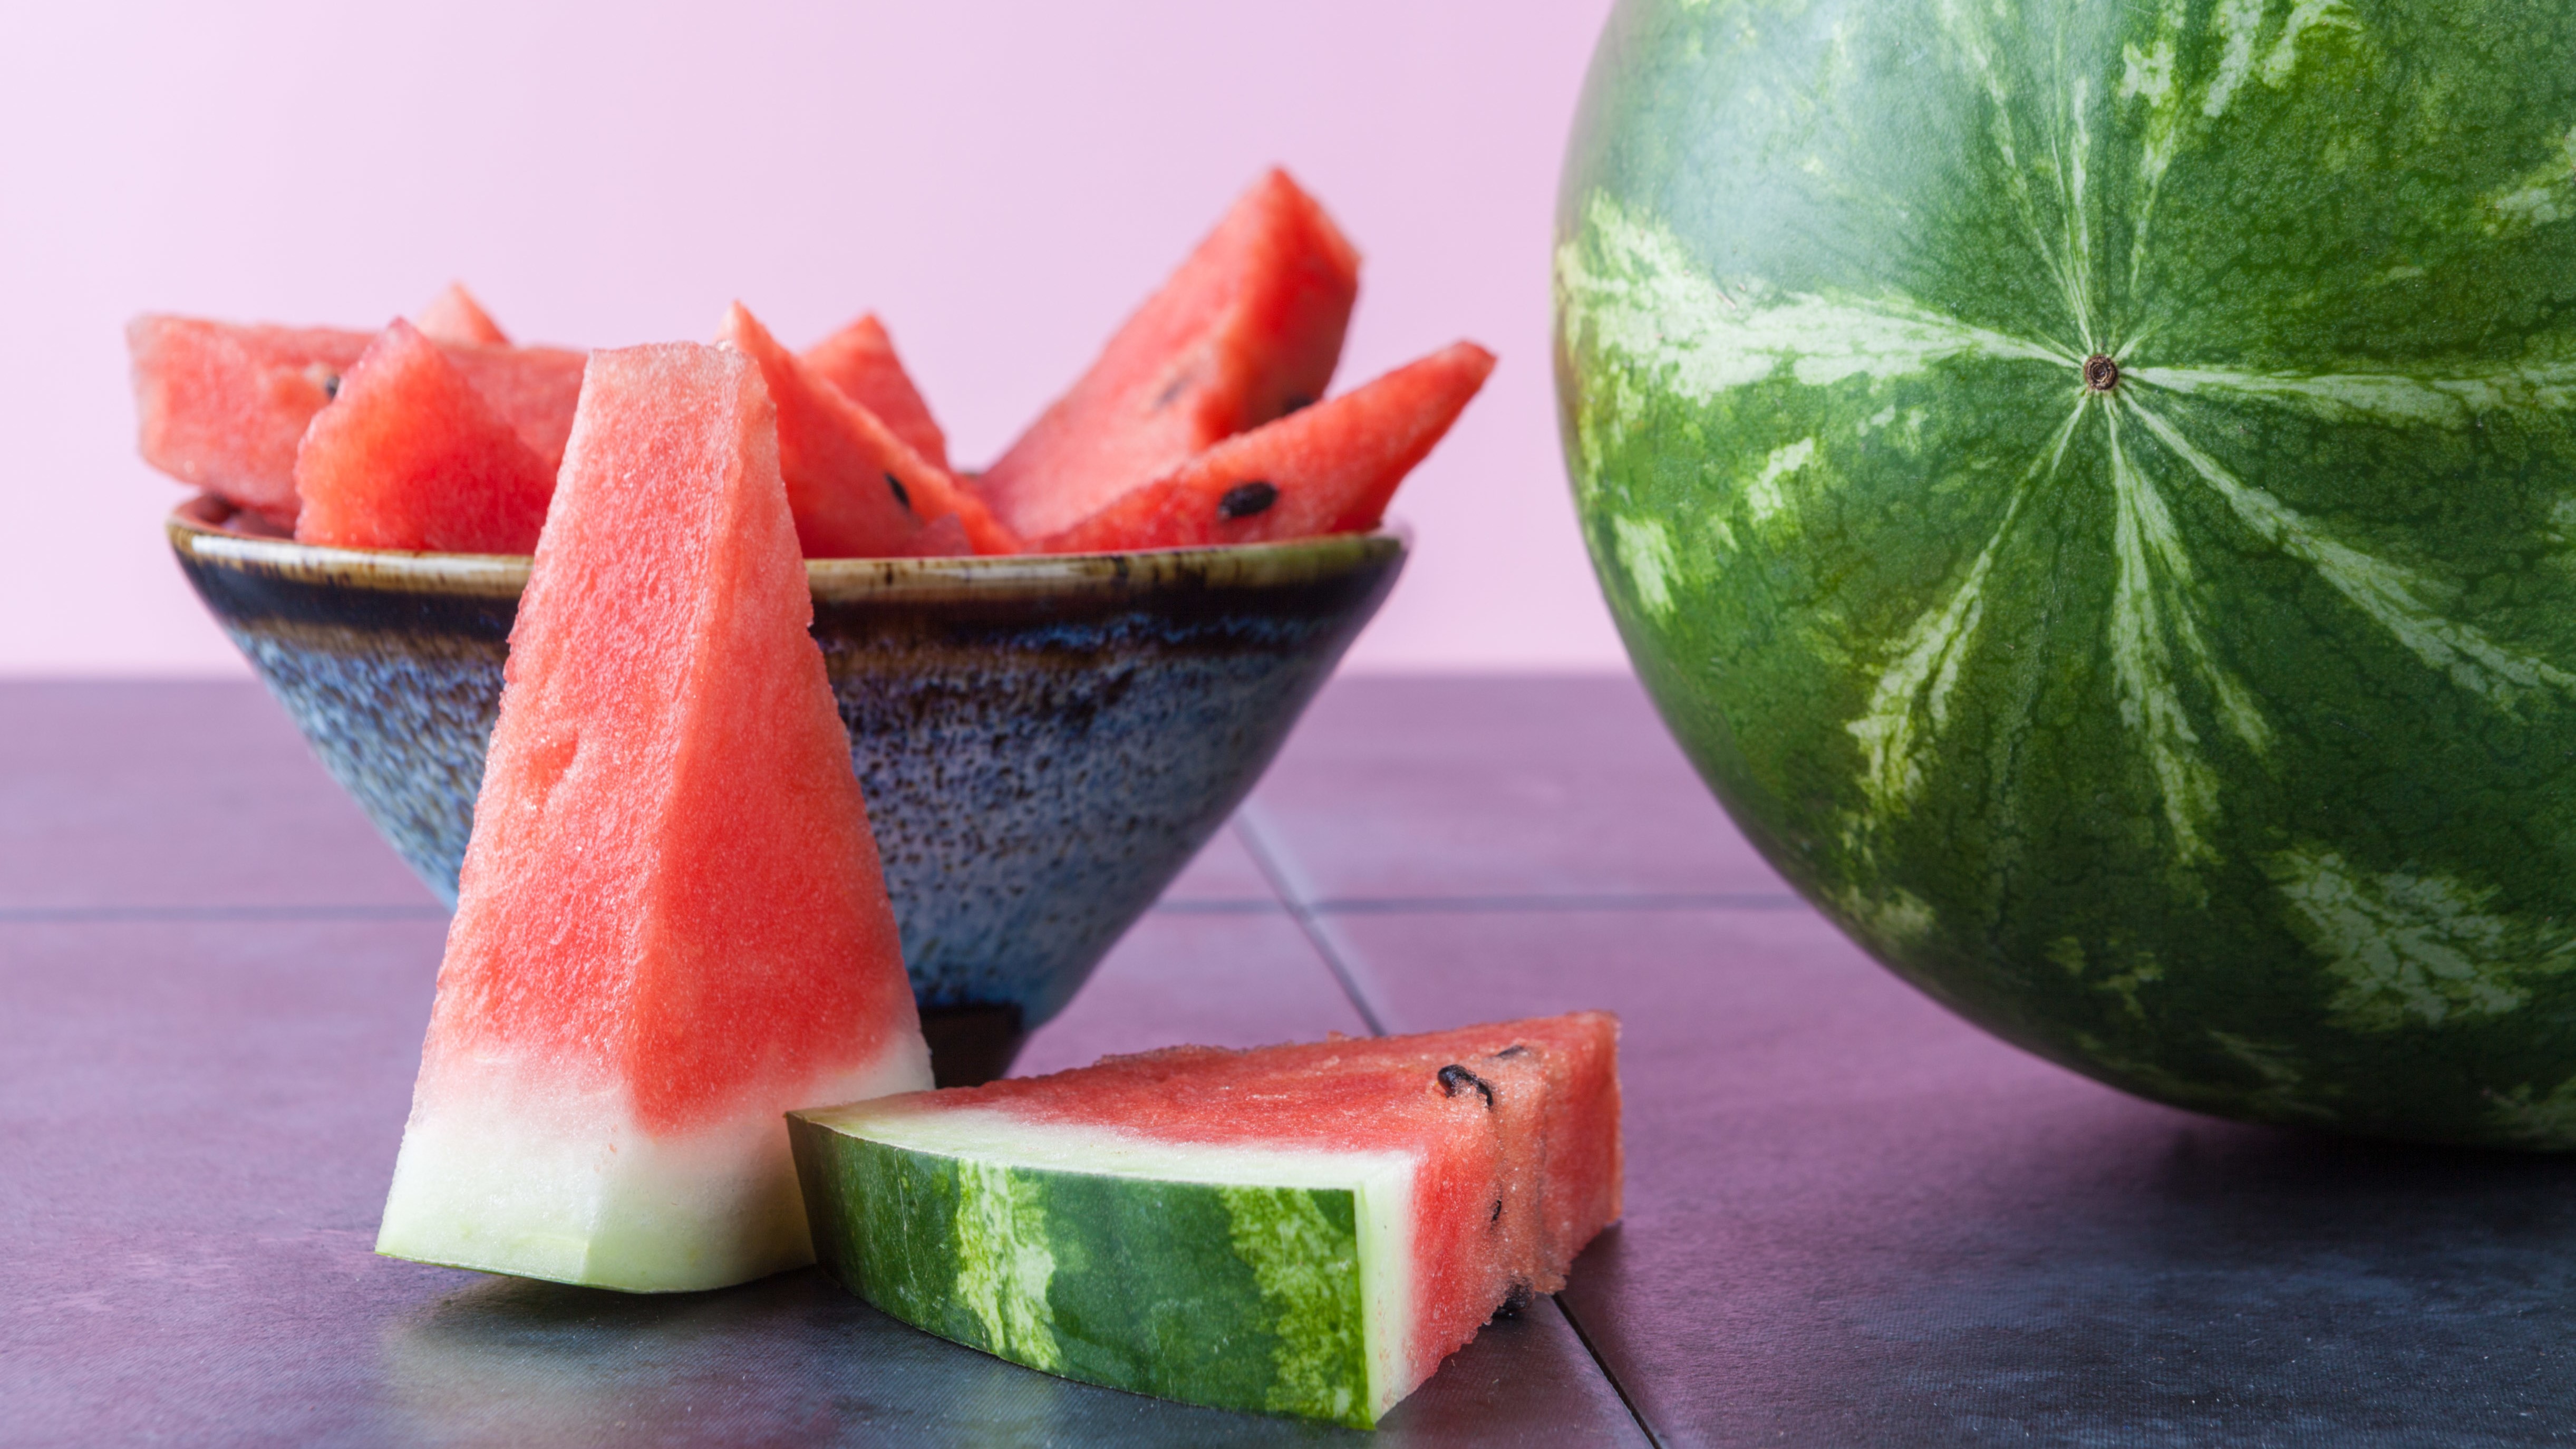 Watermelon: Health benefits, risks & nutrition facts | Live Science